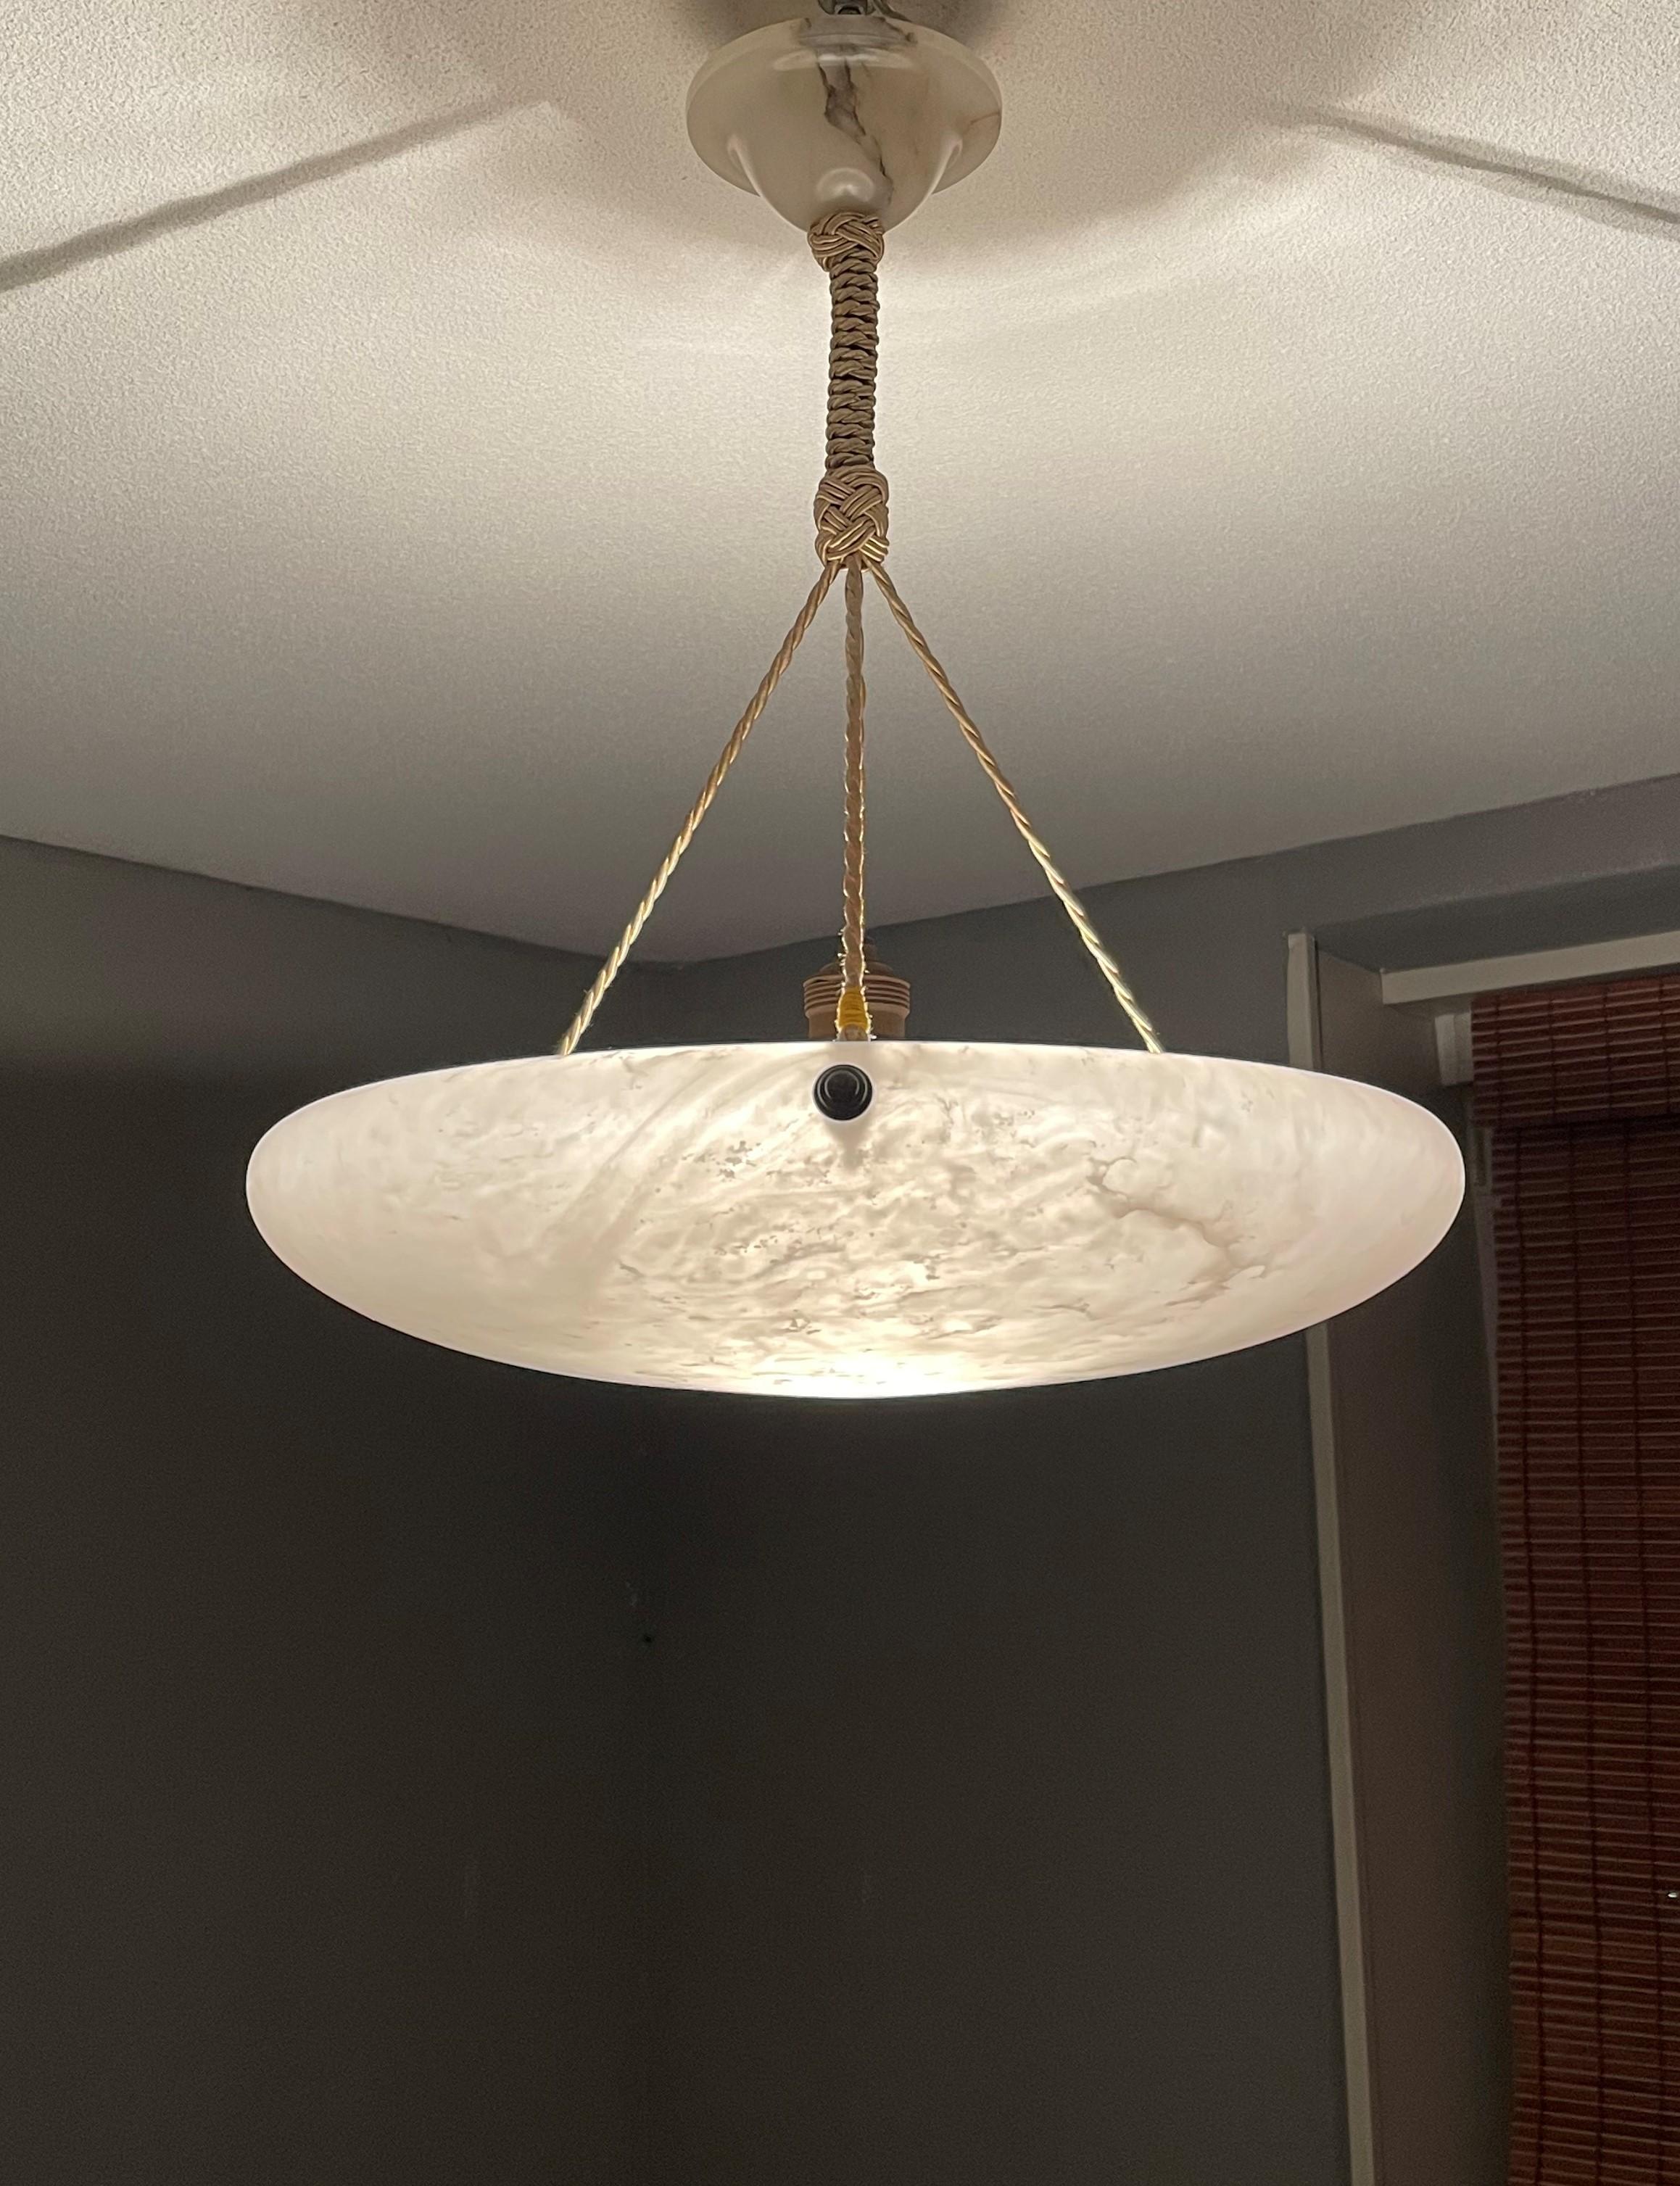 Timeless and beautiful design pendant with the perfect, pearl color alabaster shade.

With early 20th century light fixtures as one of our specialities, we have learned that certain shapes are more sought after than others. This relatively flat